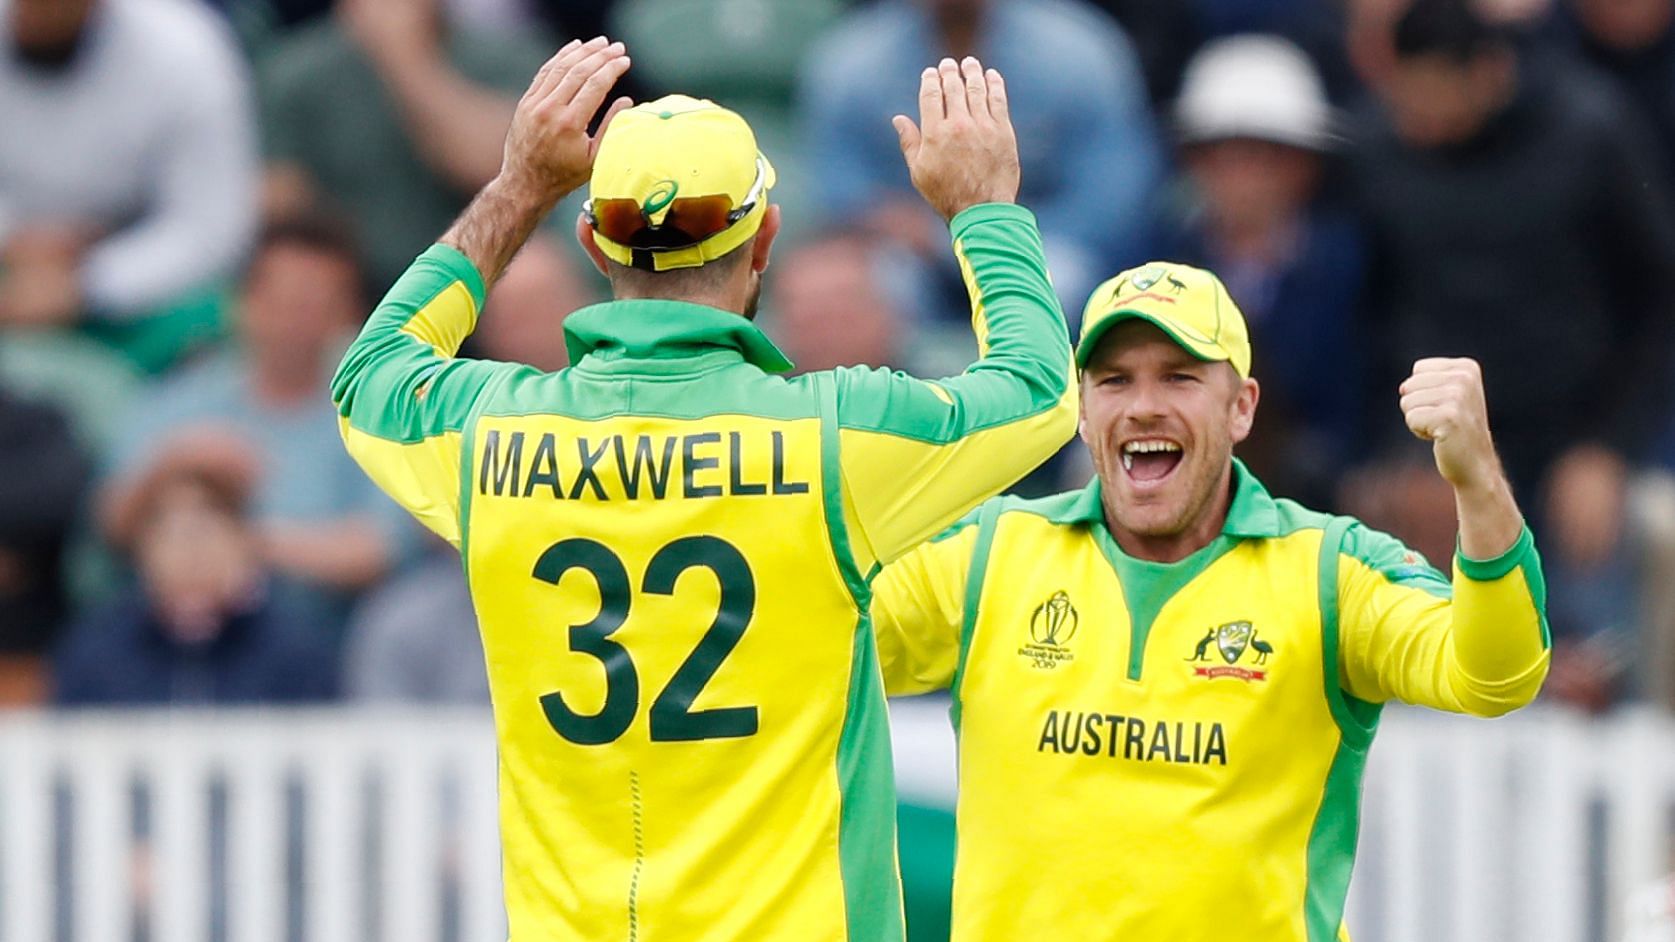 Glenn Maxwell and Aaron Finch’s relay catch saw Chris Woakes walking back to the hut for 26.